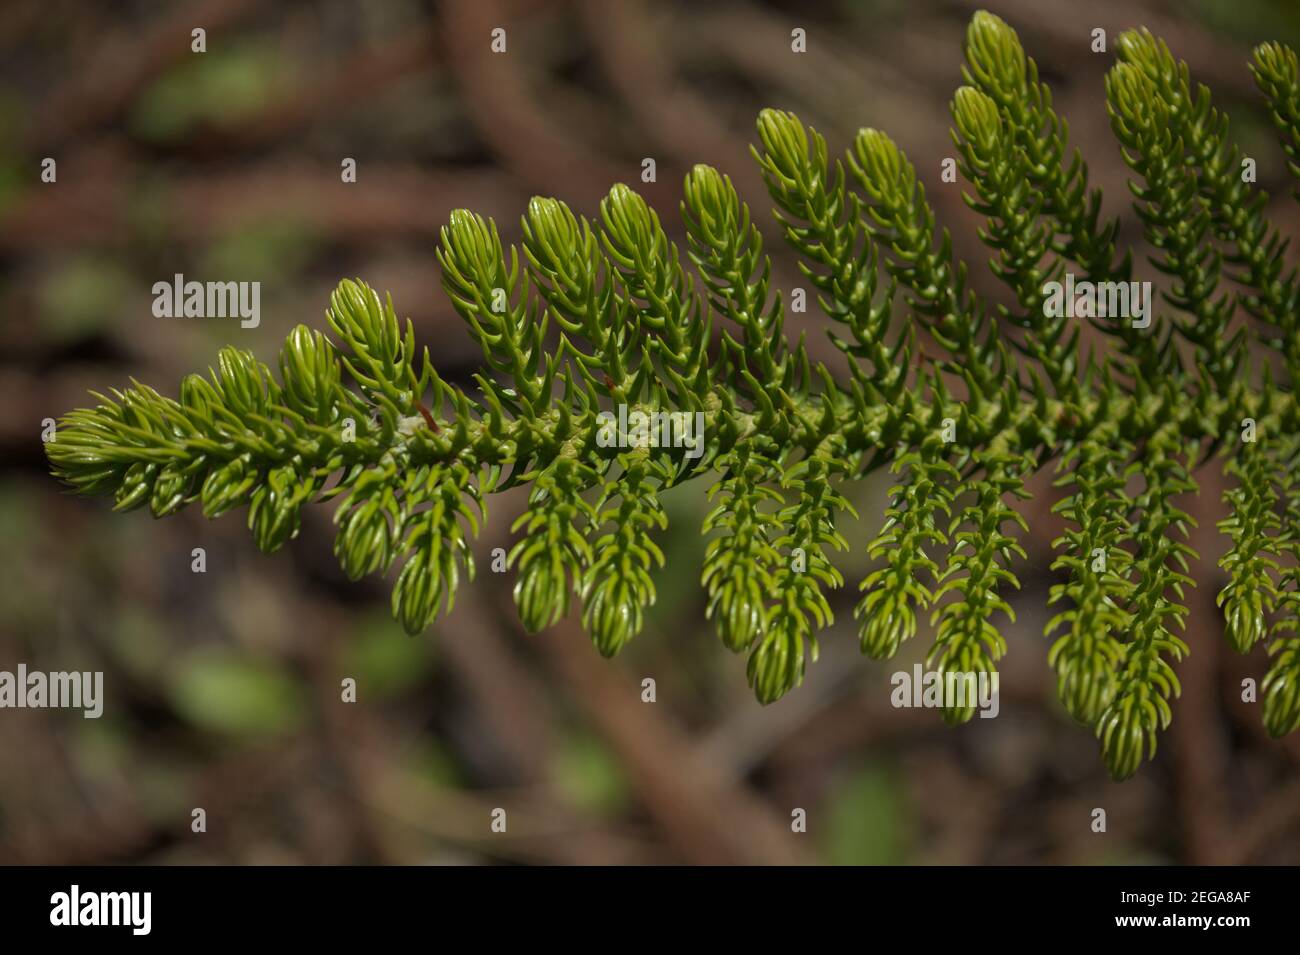 Green small Leaves of Araucaria heterophylla natural macro floral background Stock Photo